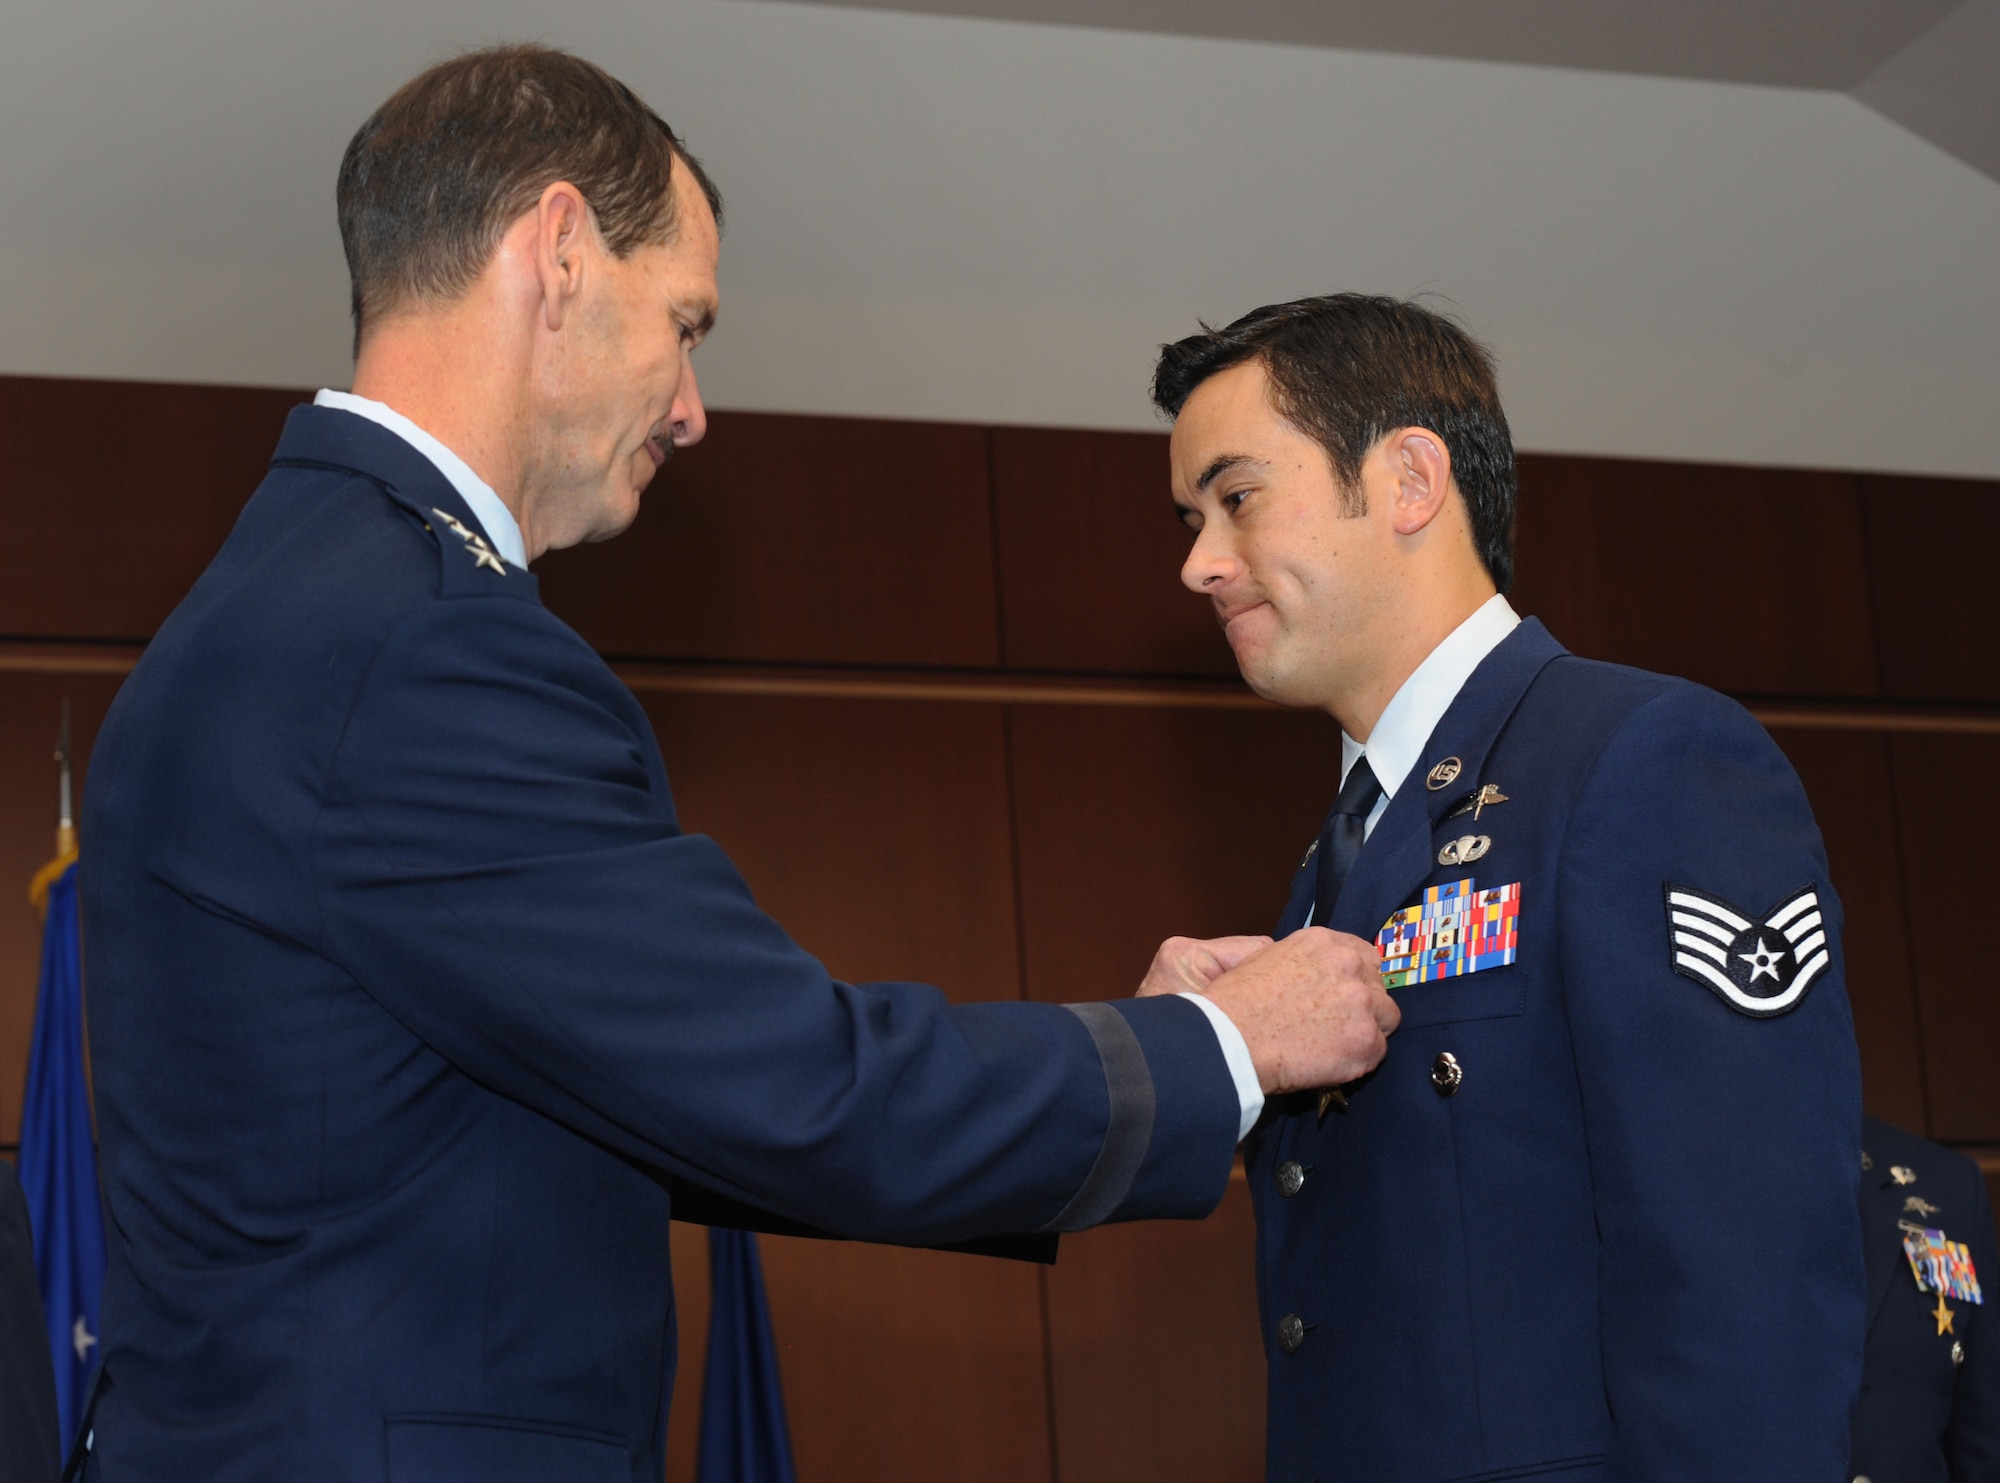 Air National Guard Director Lt. Gen. Stanley E. Clark III, presents the Bronze Star medal to Staff Sgt. Christopher Jones, a combat controller with the Oregon Air National Guard's 125th Special Tactics Squadron, during a ceremony at the 41st Infantry Division Armed Forces Reserve Center at Camp Withycombe, in Clackamas, Ore., March 24, 2014. (U.S. Air National Guard photo by Tech. Sgt. John Hughel, 142nd Fighter Wing Public Affairs/Released)